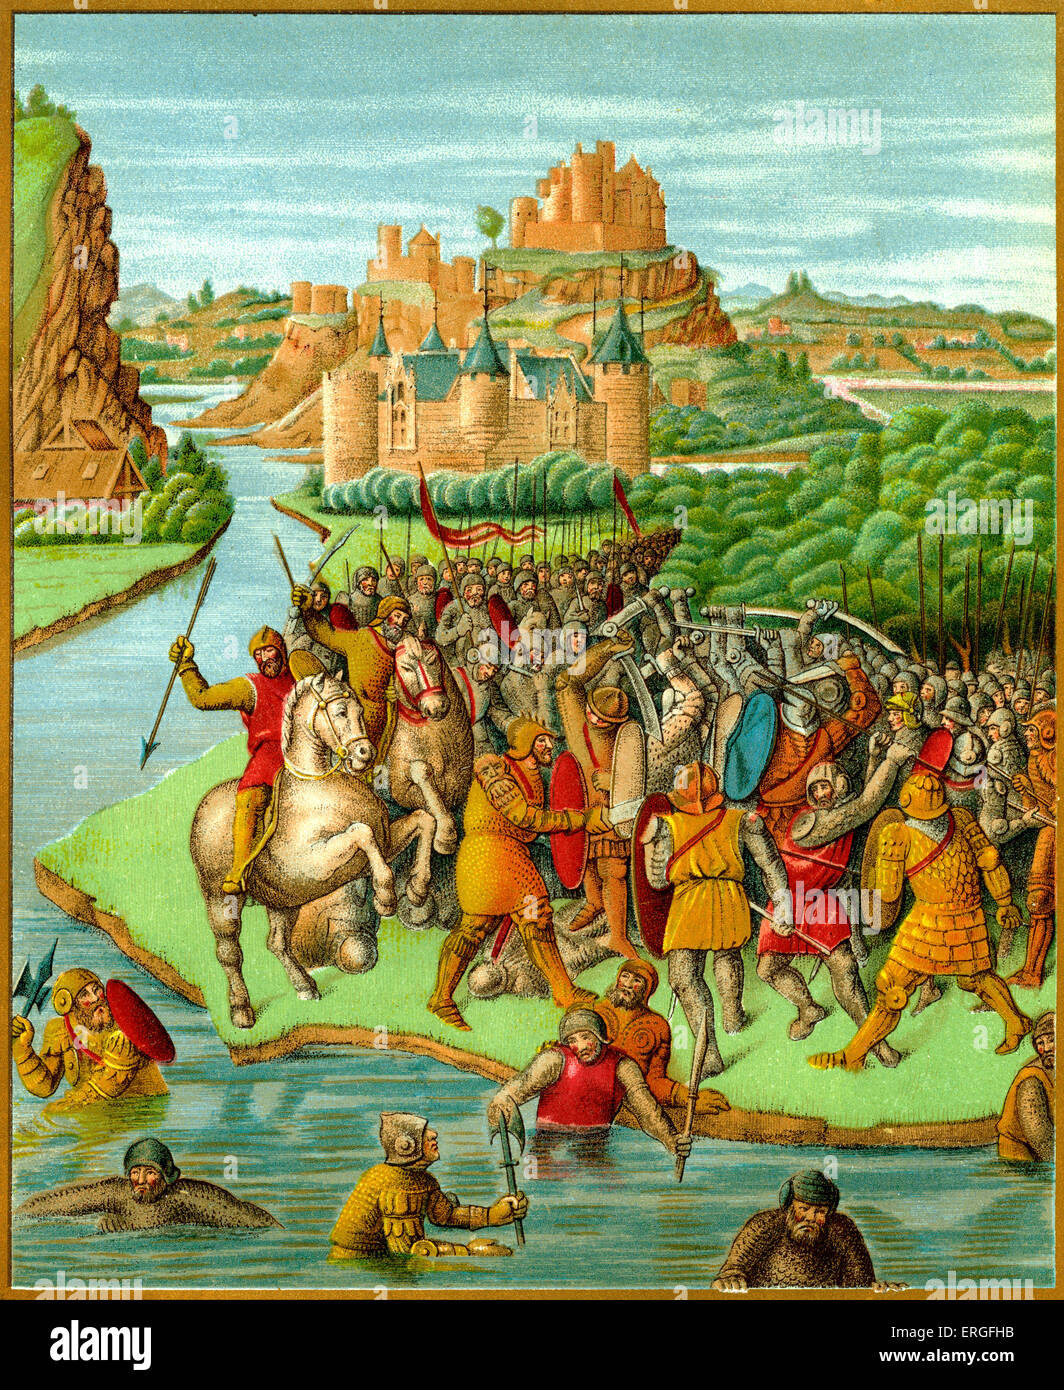 Battle of Jonathan against Baccide'. Castle and military uniforms of the 15th century. After miniature by J.Fouquet in 'History of the Jews' by Josephus, translation from Greek to French. Stock Photo